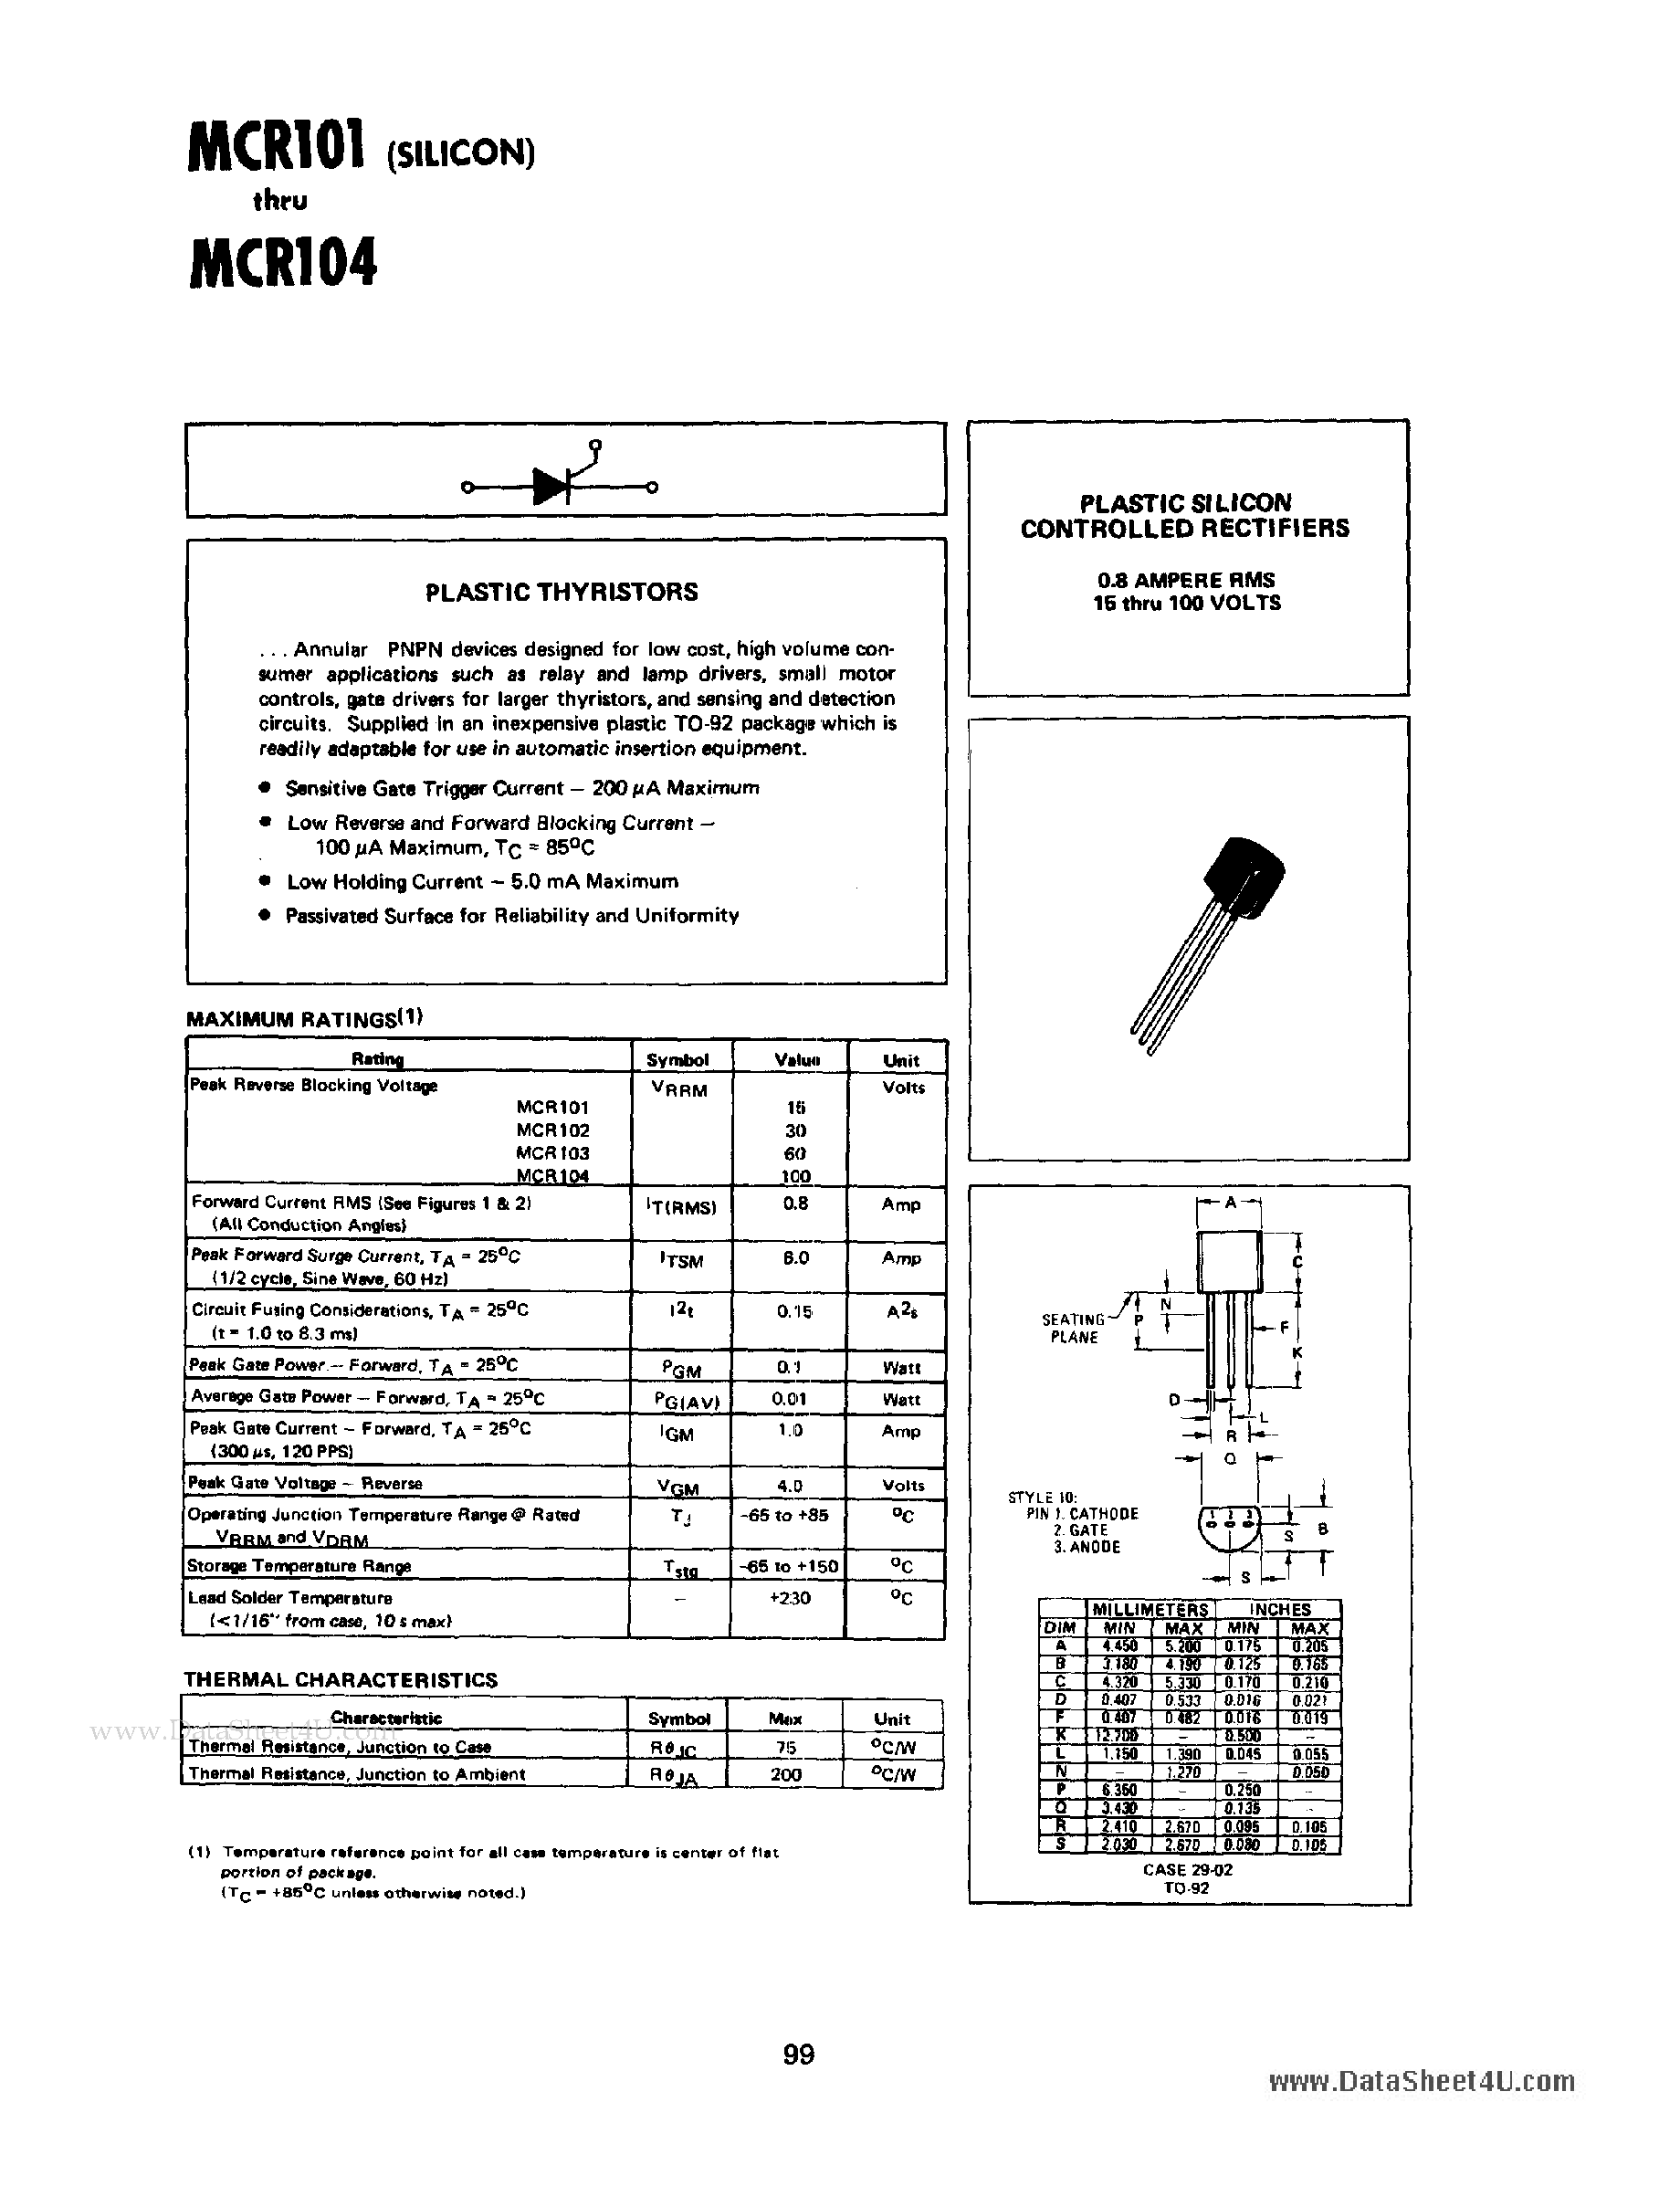 Datasheet MCR101 - (MCR101 - MCR104) Plastic Silicon Controlled Rectifiers page 1